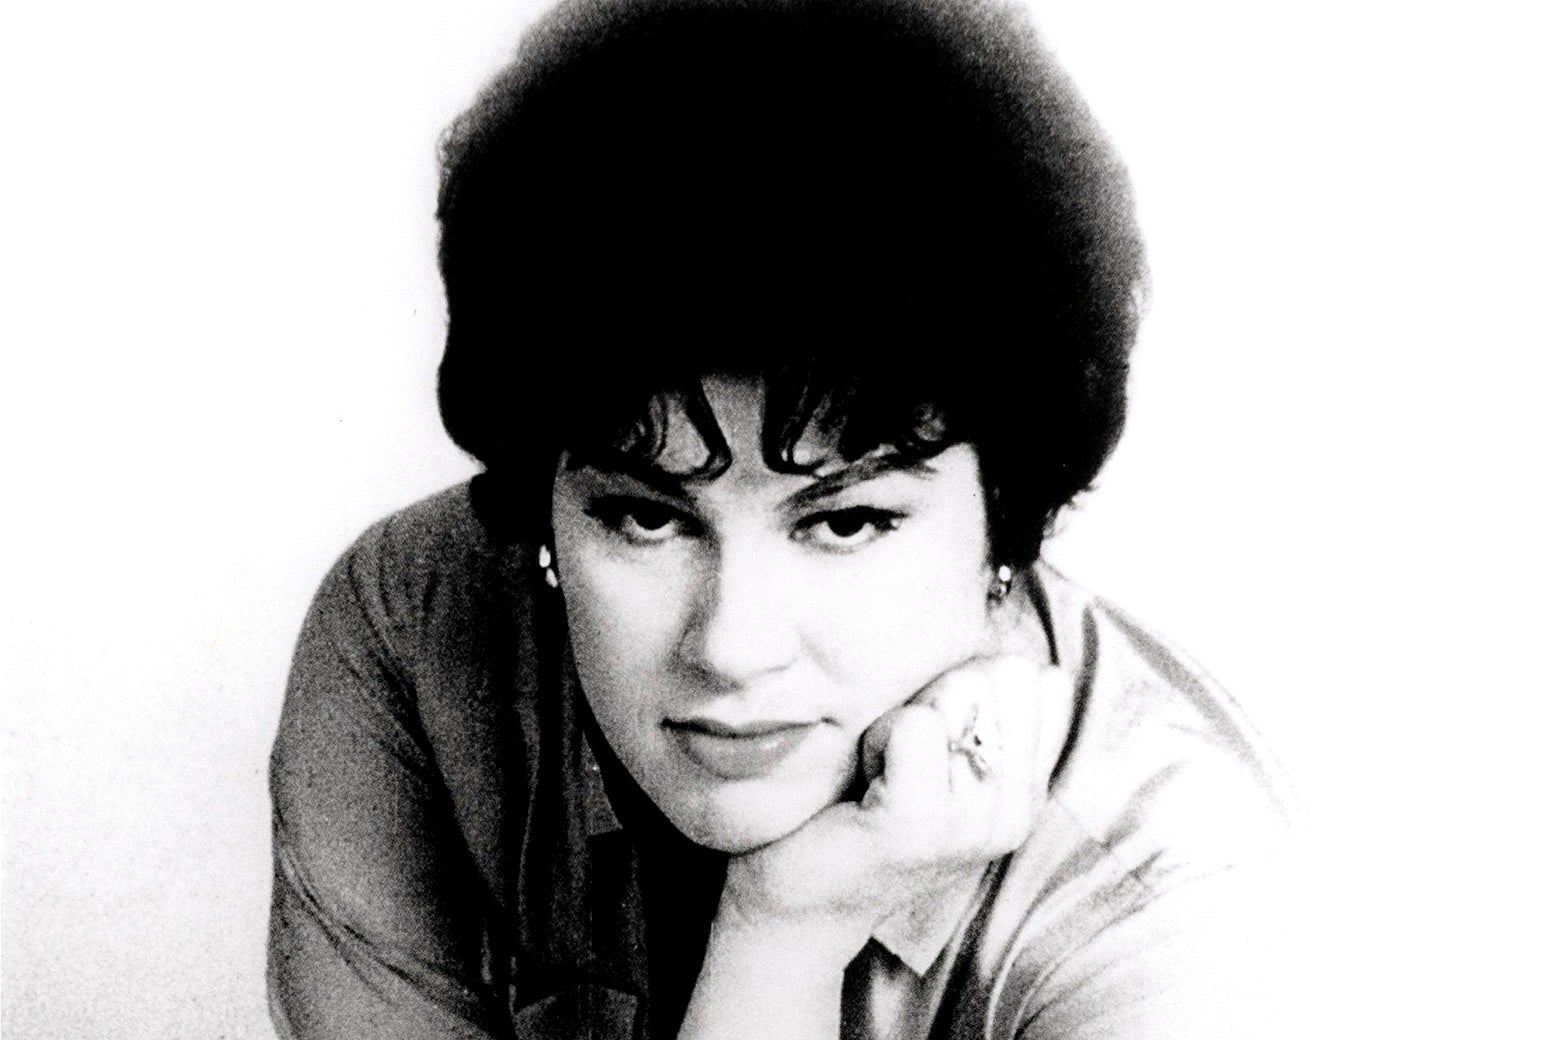 Patsy Cline leaning forward with her chin on her hand.